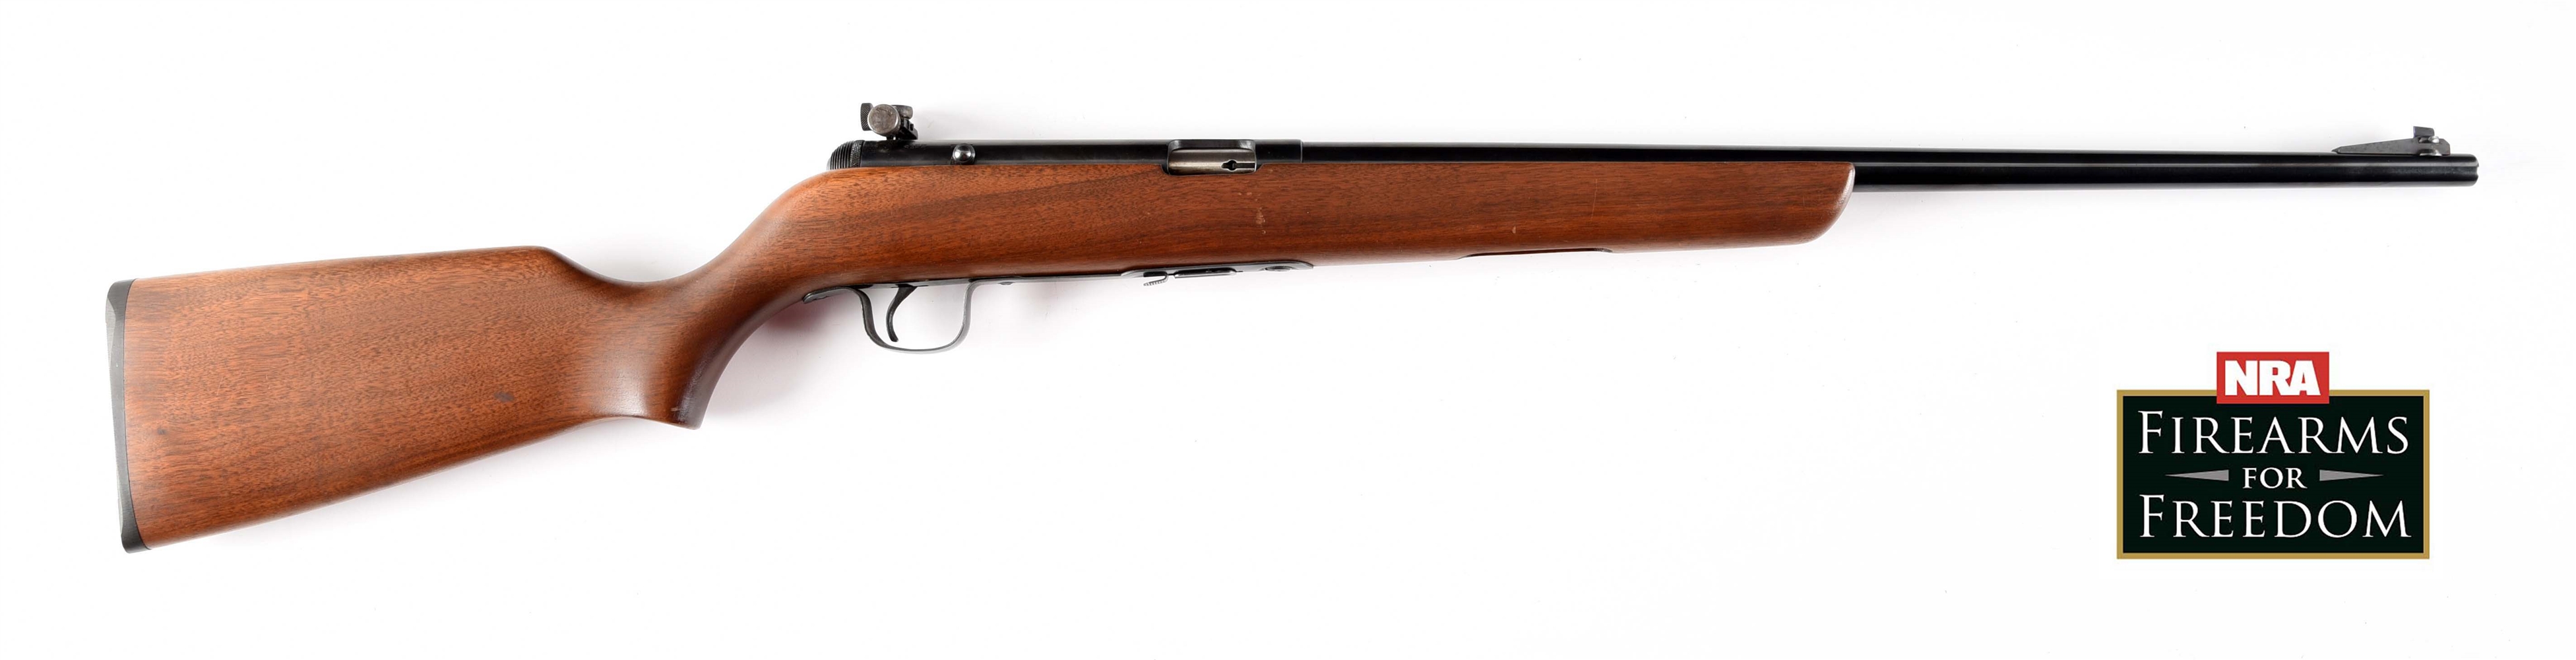 (C) H&R ARMS MODEL 151 "LEATHERNECK" SEMI-AUTOMATIC RIFLE.